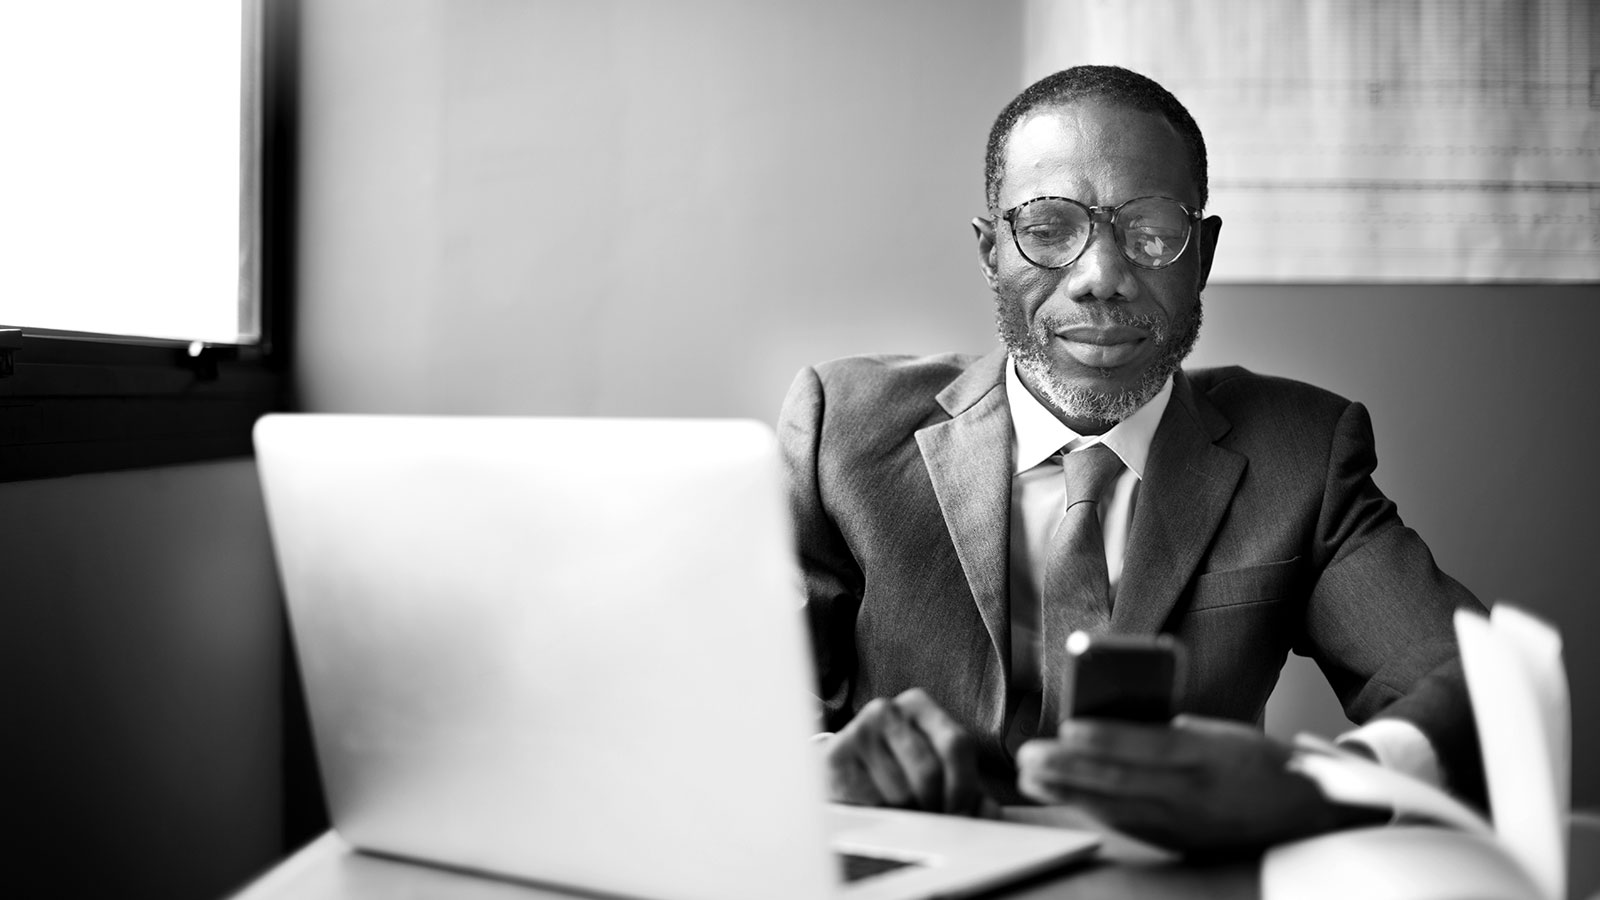 LeasePilot Brand Identity – Photography: Middle-Aged Businessman Using Smartphone and Laptop in Black & White